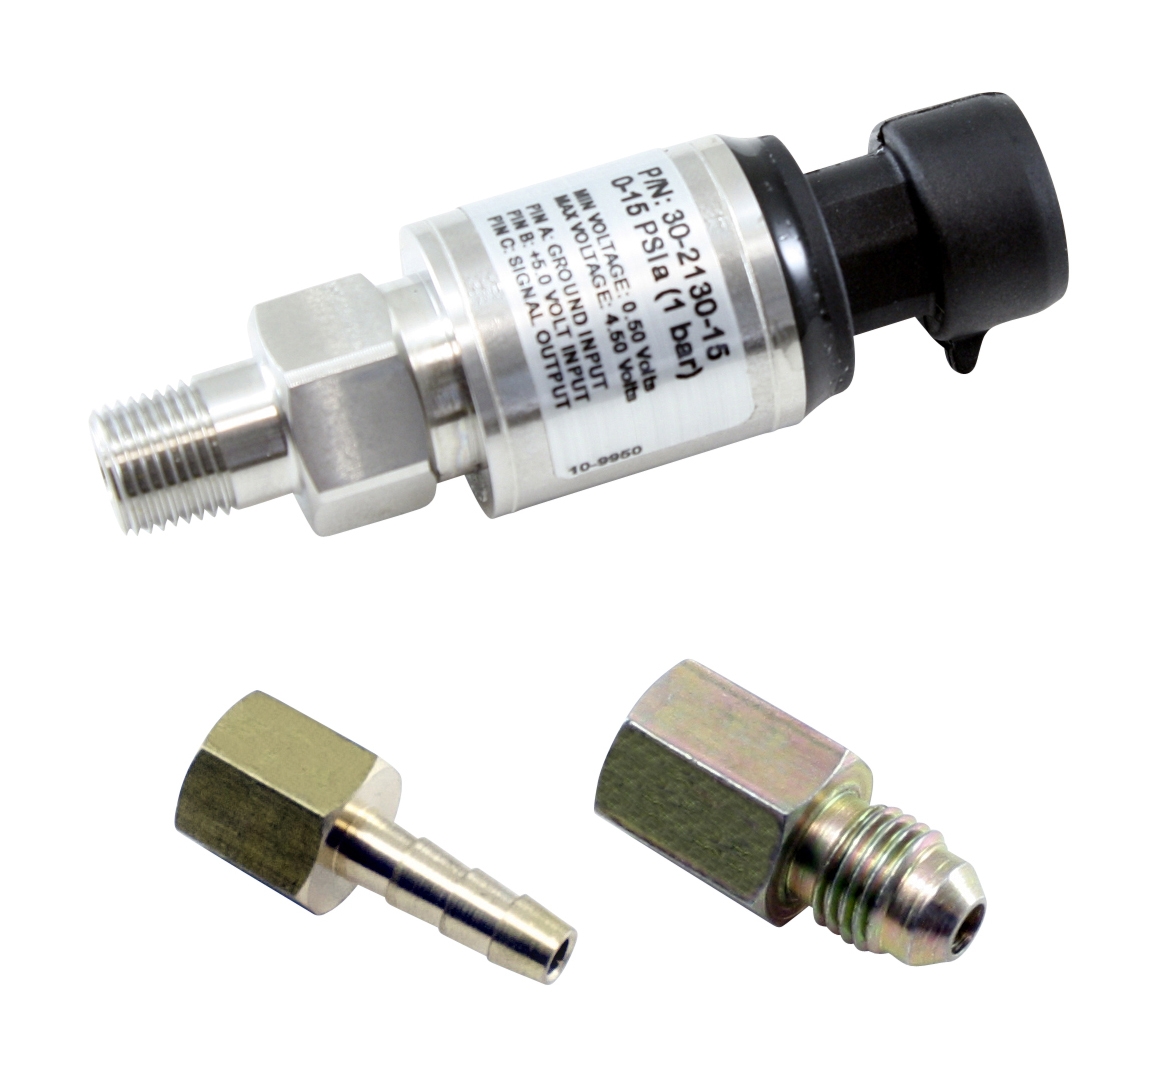 AEM 15 PSIa or 1 Bar Stainless Sensor Kit. Stainless Steel Sensor Body. 1/8" NPT Male Thread. Includes: 15 PSIa or 1 Bar Stainless Sensor, Connector, Pins, 1/8" NPT to -4 Adapter & 1/8" NPT to 3/16" Barb Adapter